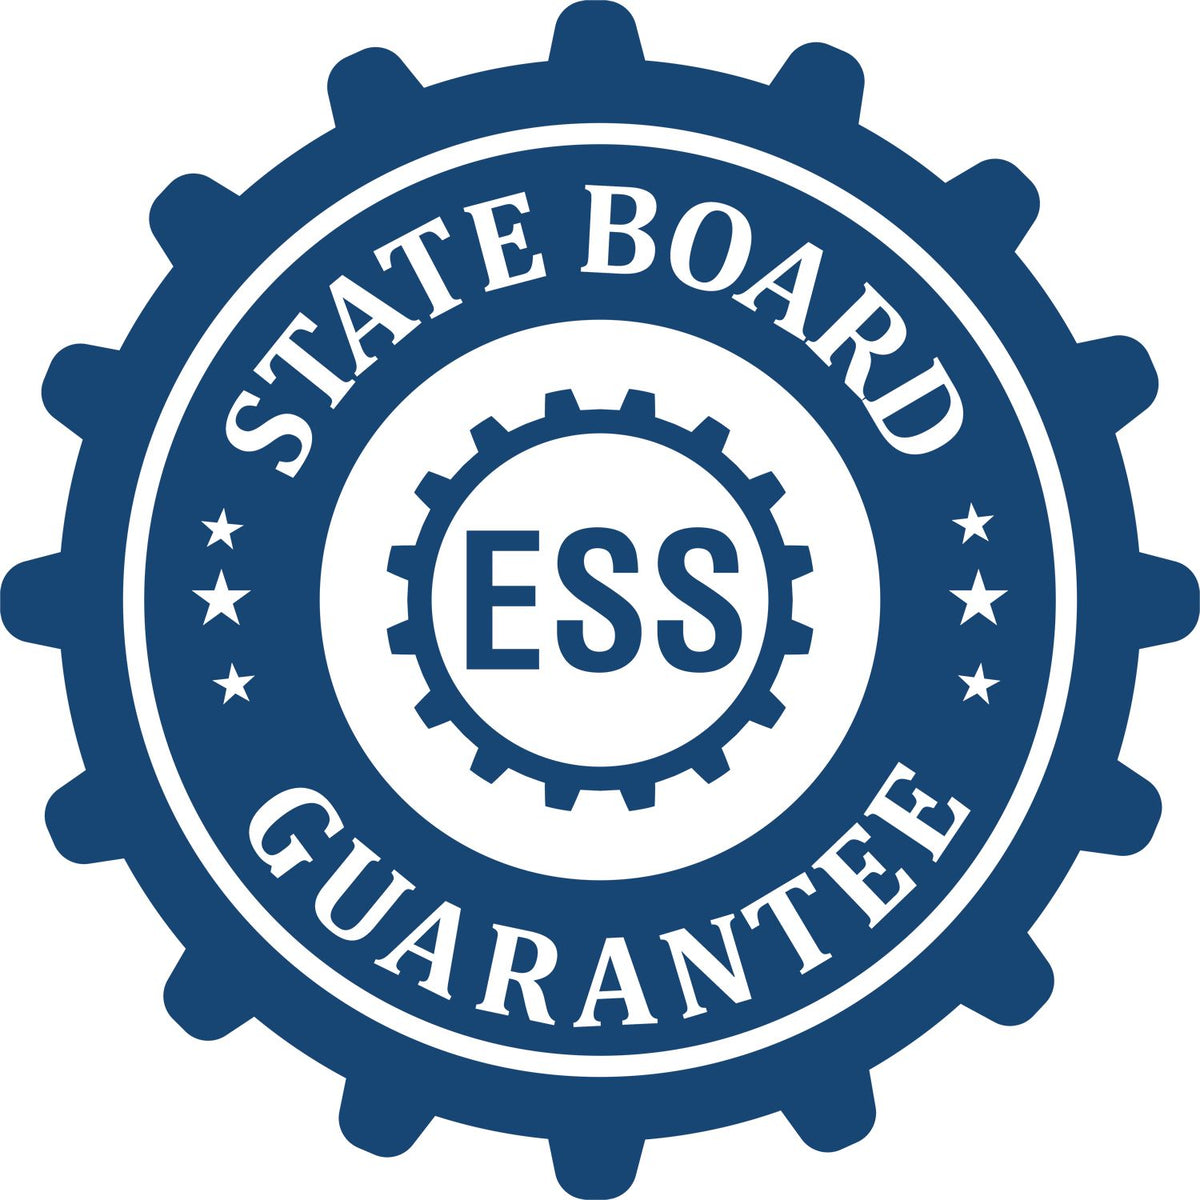 An emblem in a gear shape illustrating a state board guarantee for the Heavy Duty Cast Iron Rhode Island Architect Embosser product.